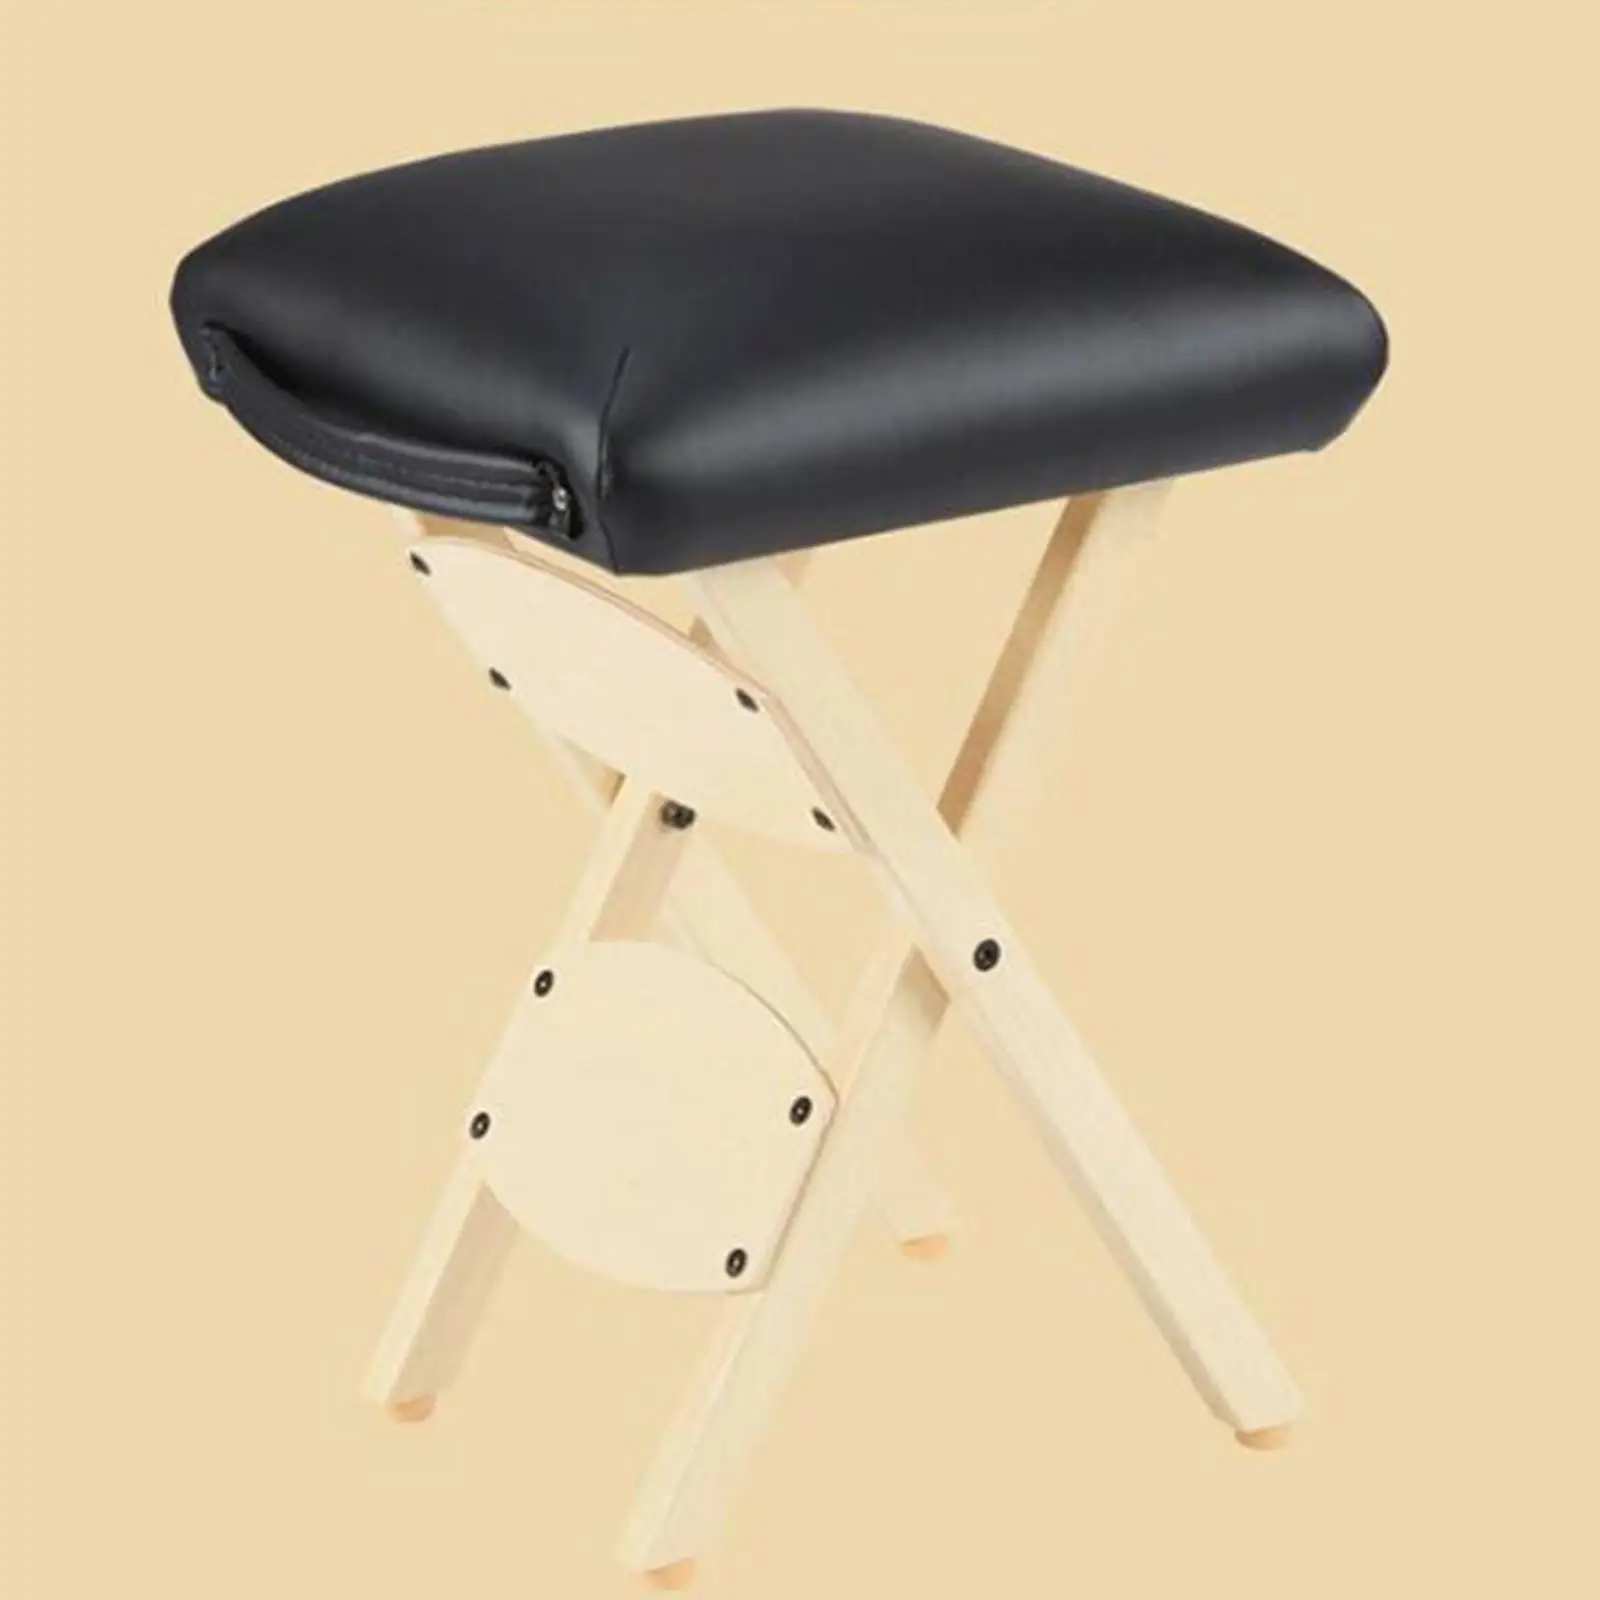 Portable Salon Stool with Footrest Nonslip Legs Ergonomic Comfortable Folding Chair for Facial Beauty Massage Task SPA